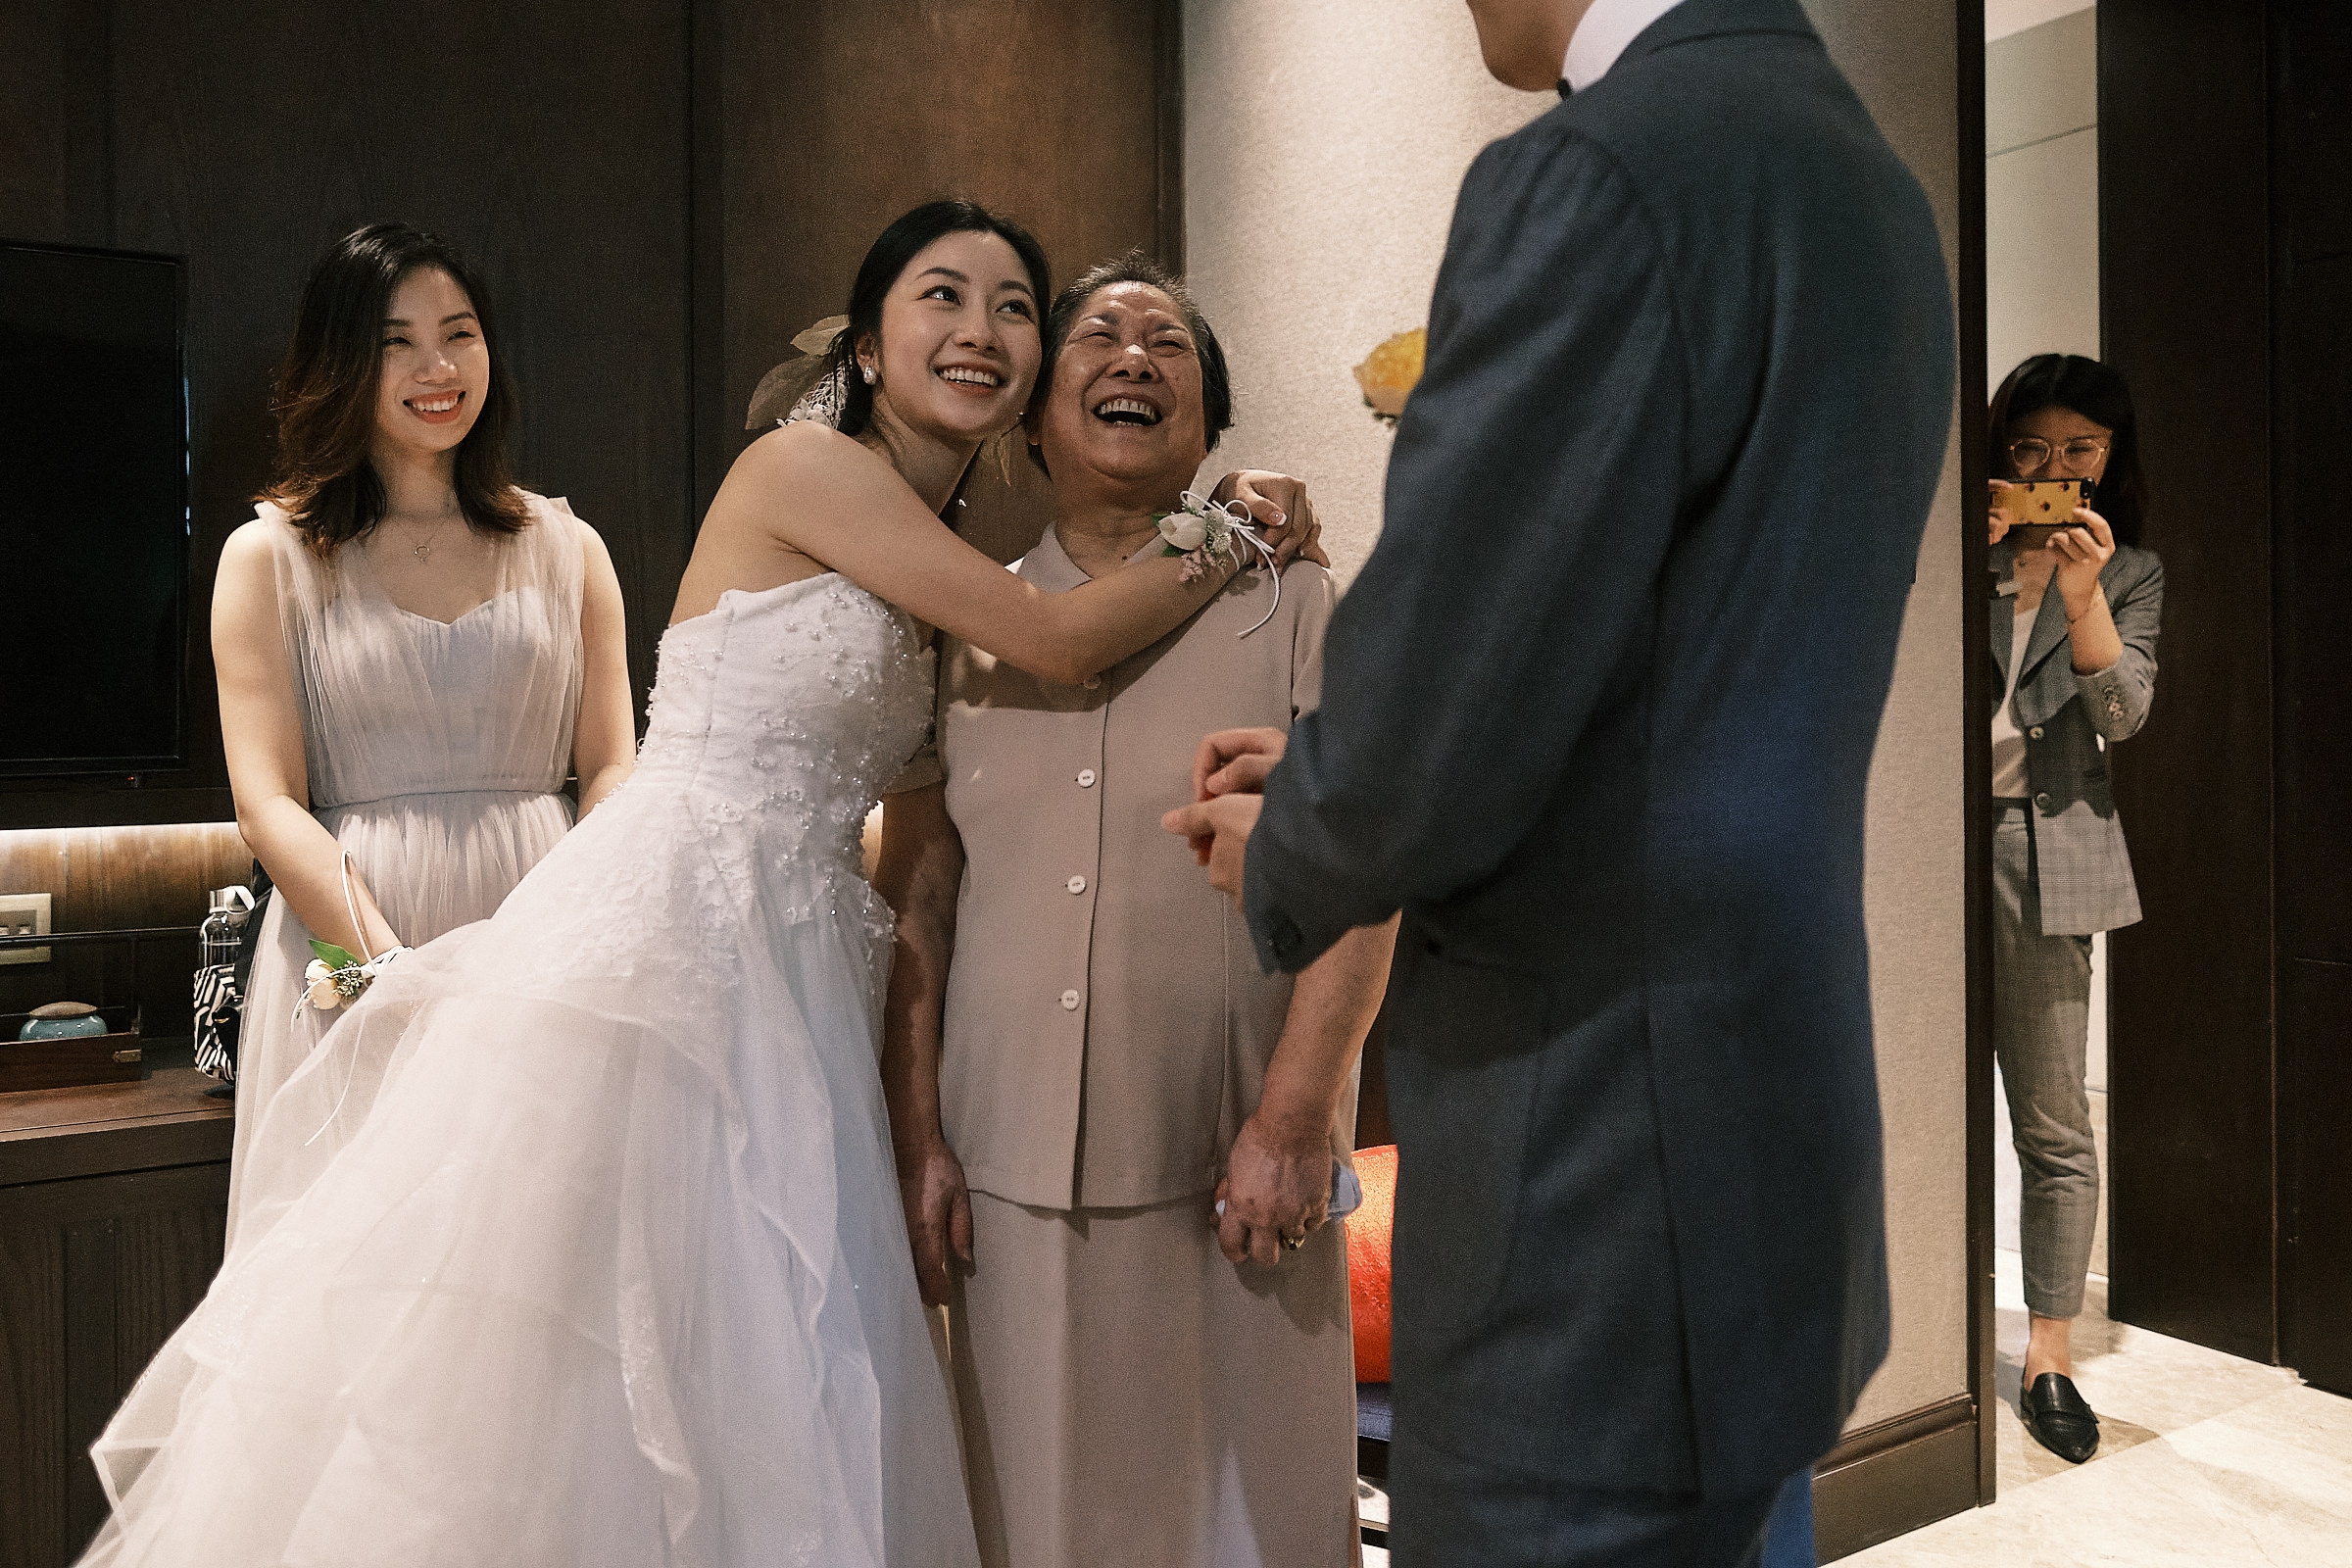 bride embraces grandmother in front of groom bridesmaid and plan